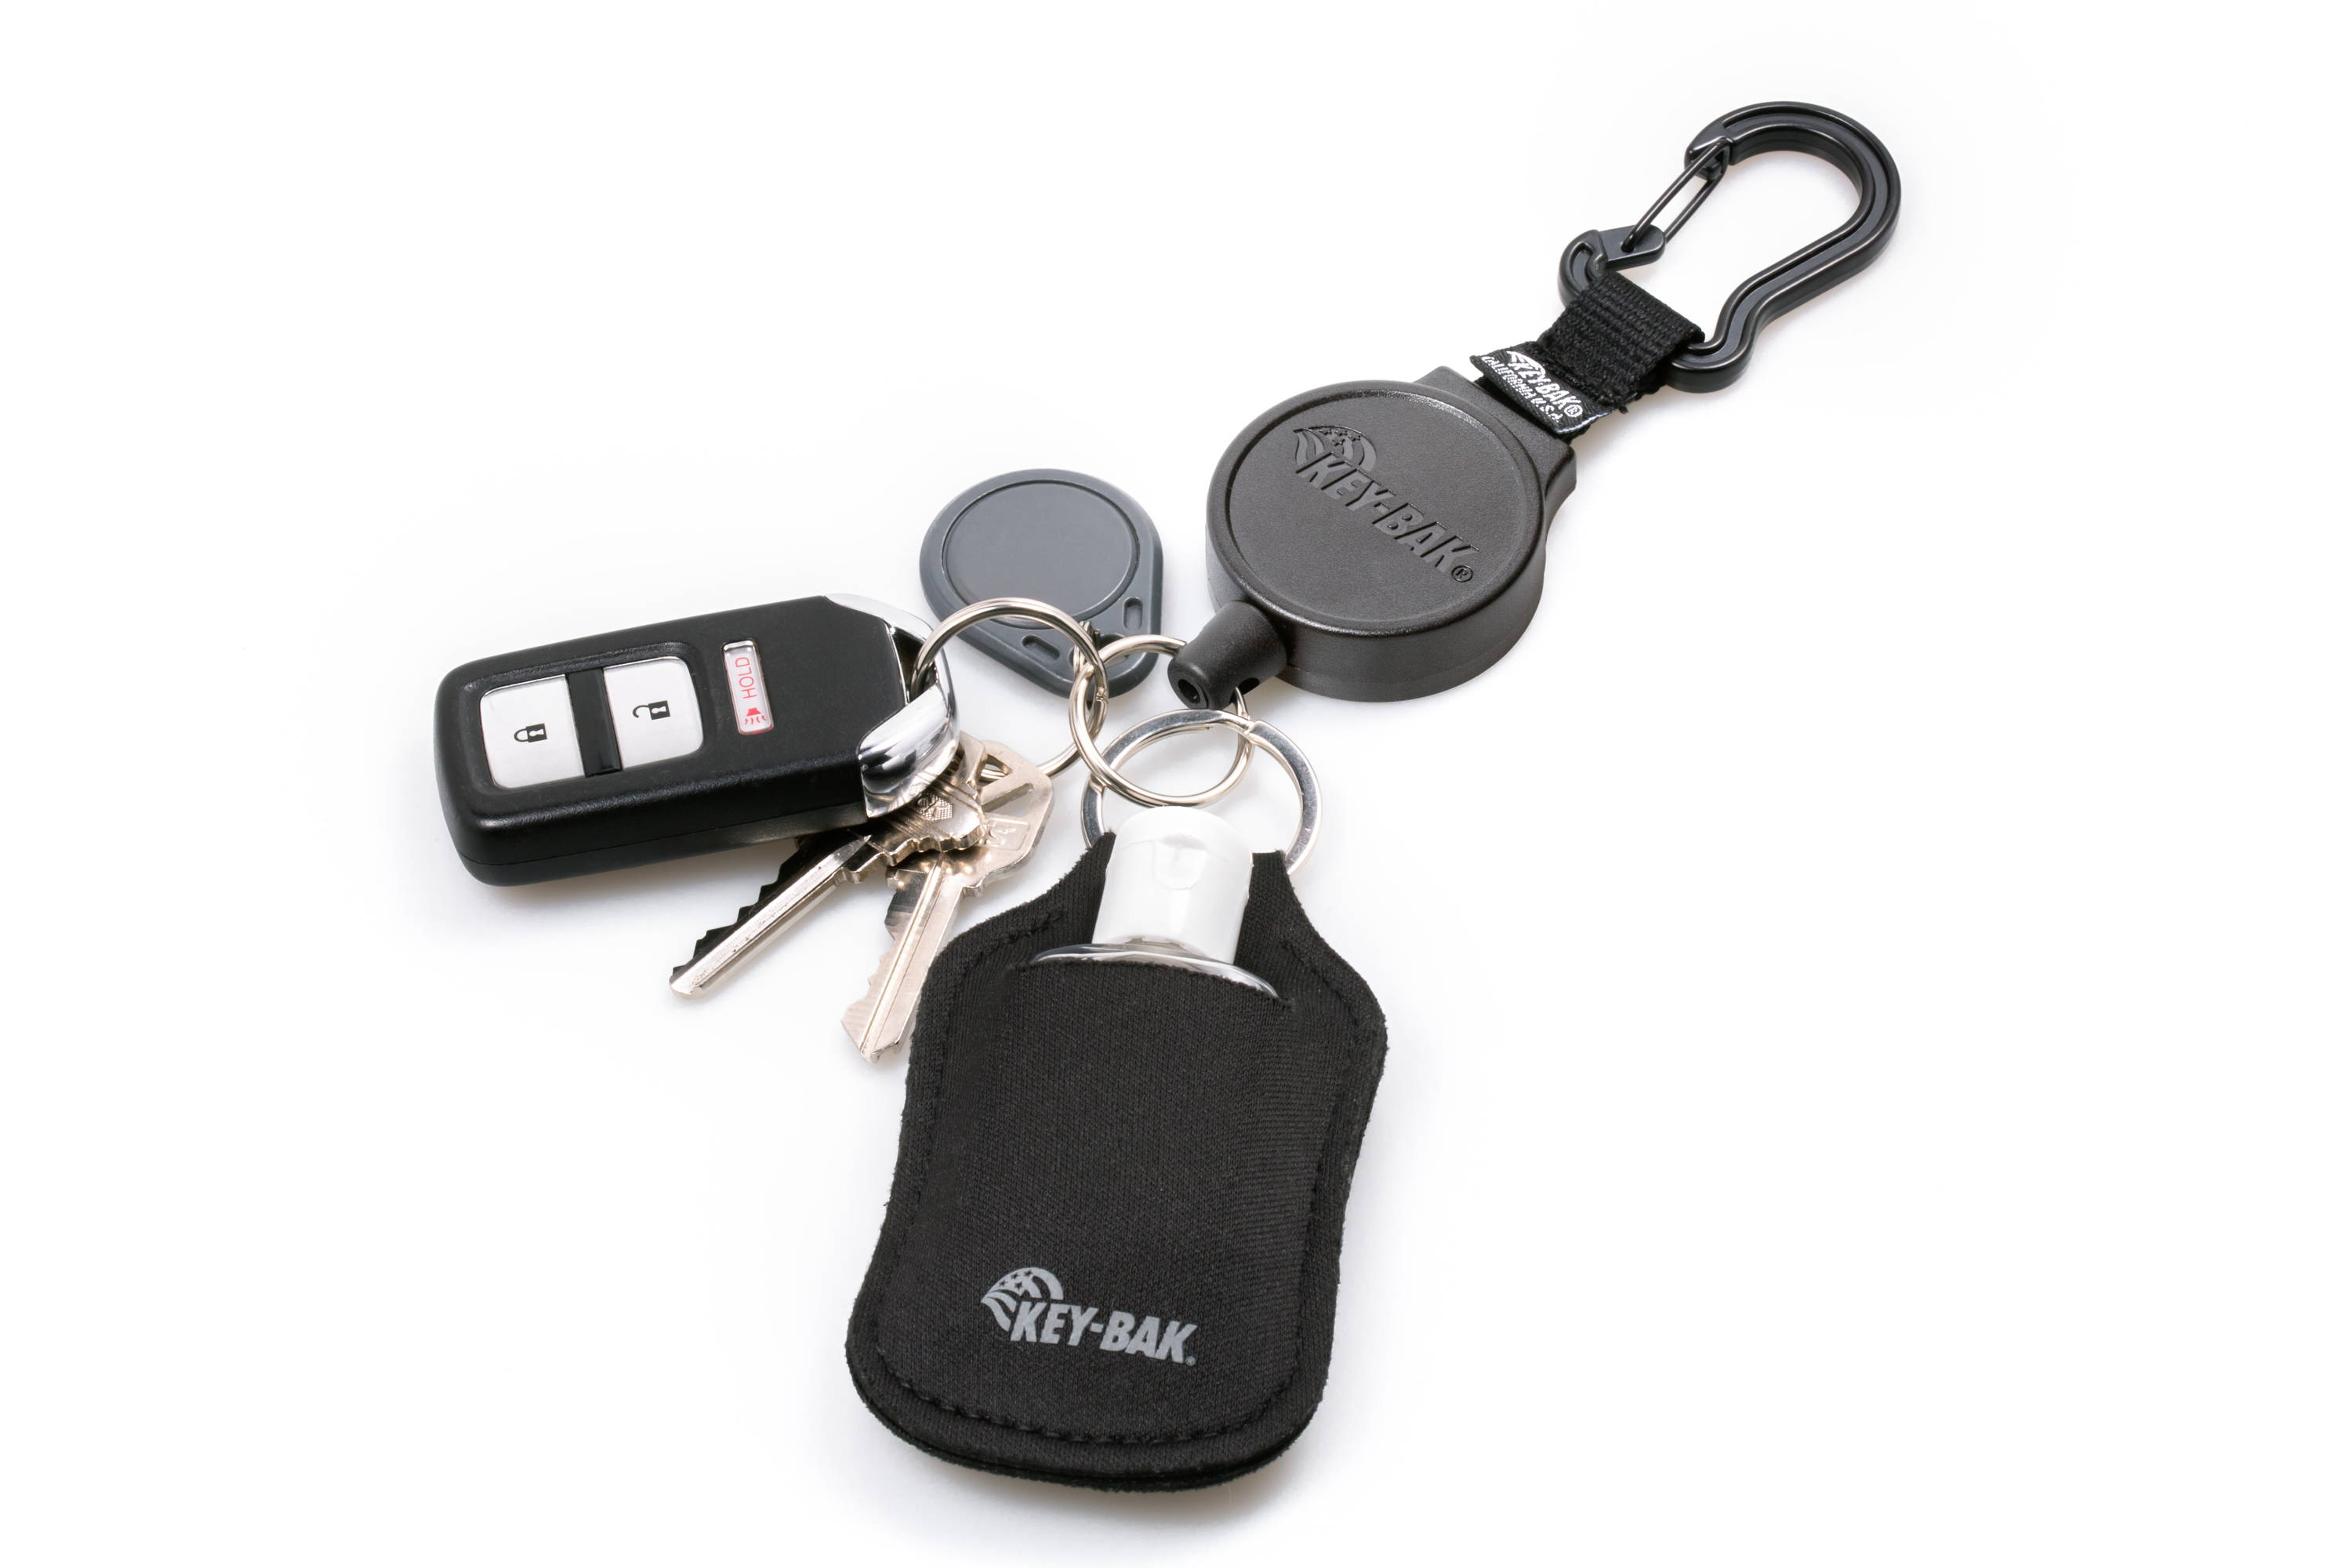 Hand Sanitizer Carrier connected to key-bak retractable keychain